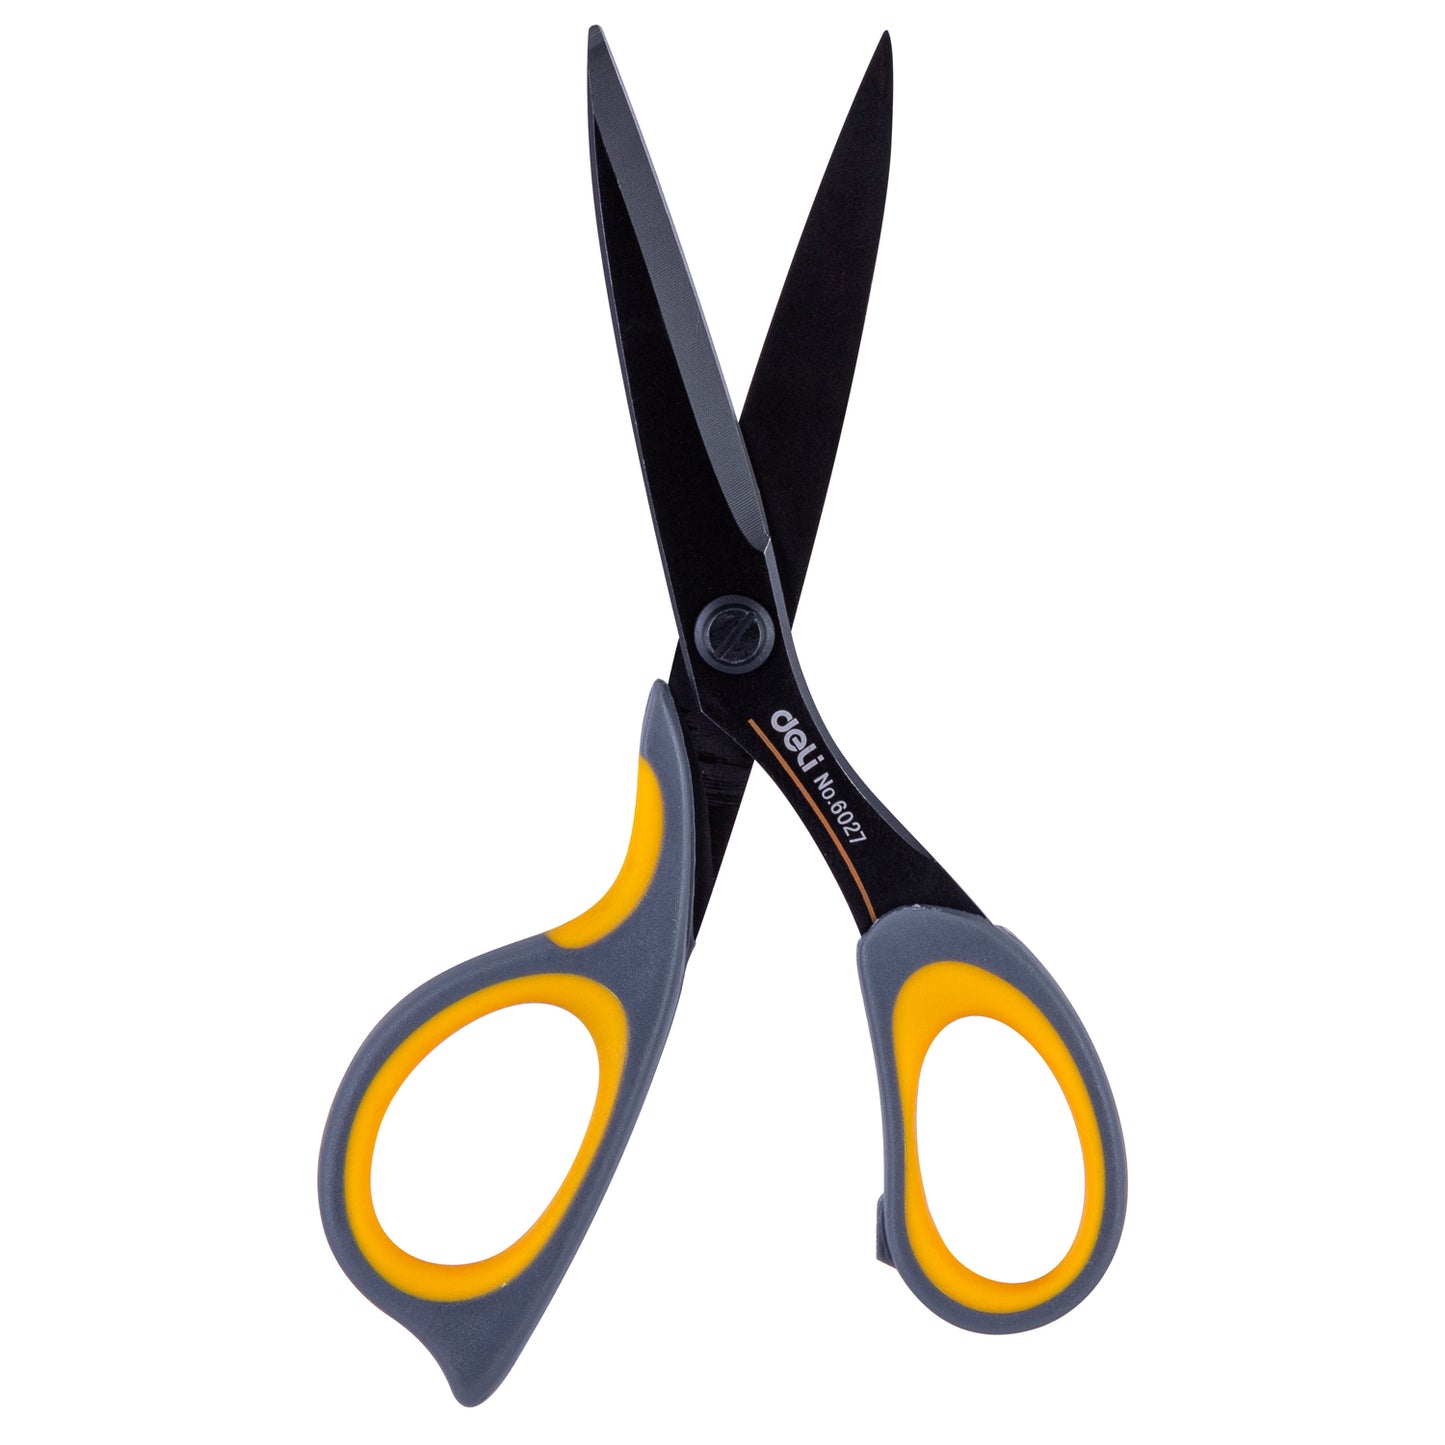 DELI W6027 SCISSORS 175mm - Color May Vary